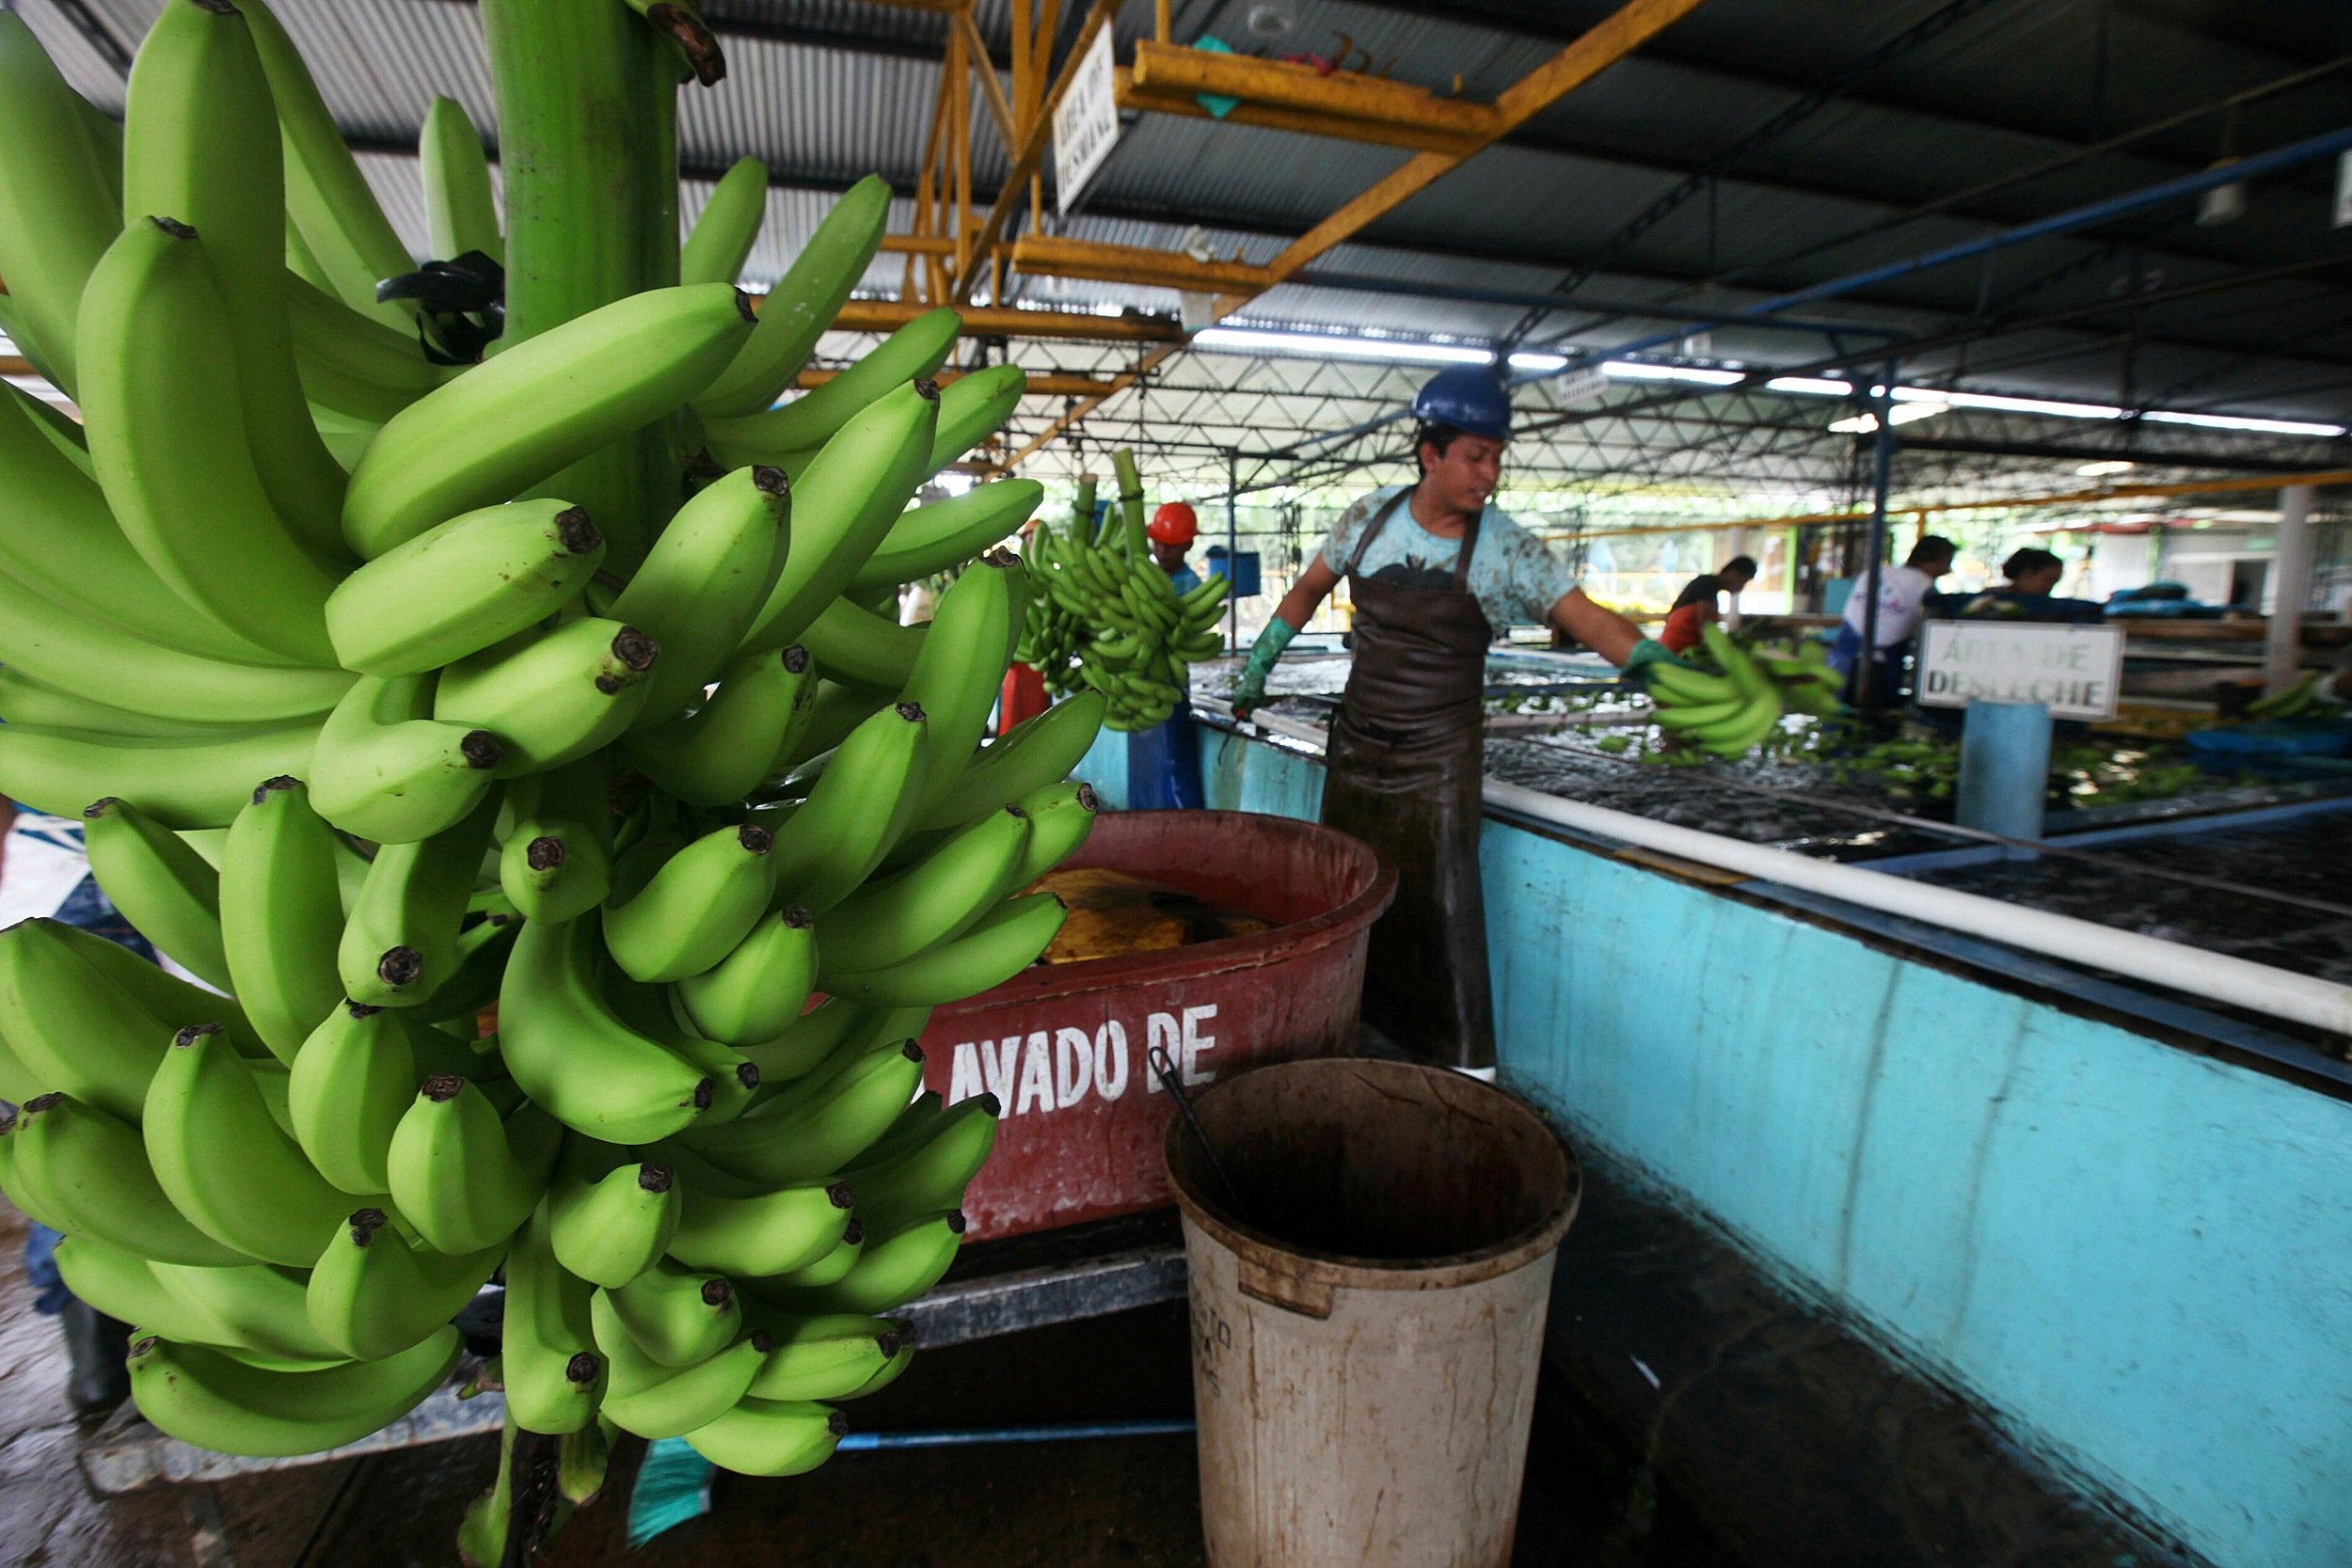 Workers sort freshly harvested bananas to be exported, at a farm in Ciudad Hidalgo, Chiapas state, Mexico.